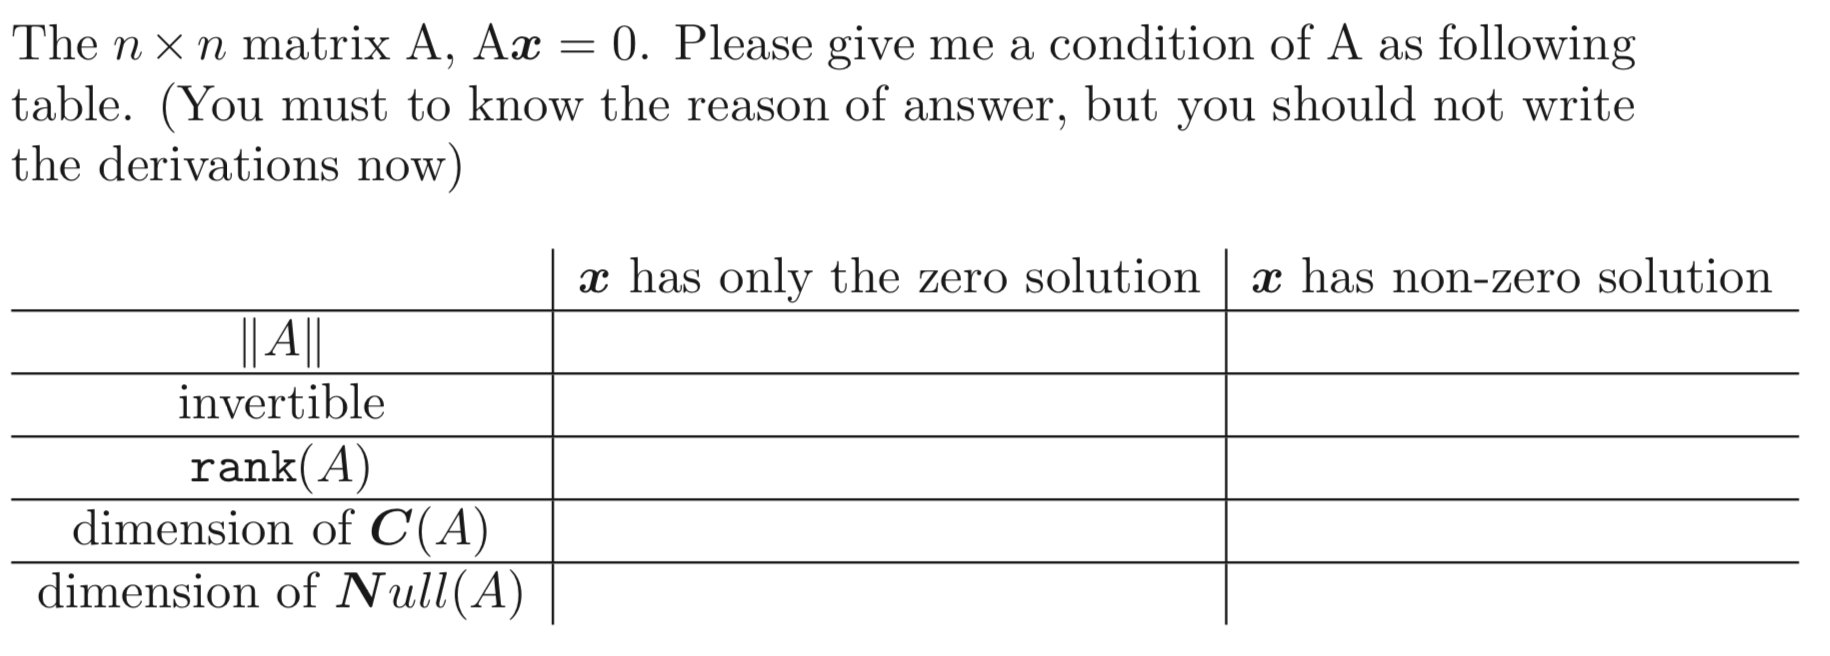 The n x n matrix A, Ax = 0. Please give me a condition of A as following table. (You must to know the reason of answer, but y